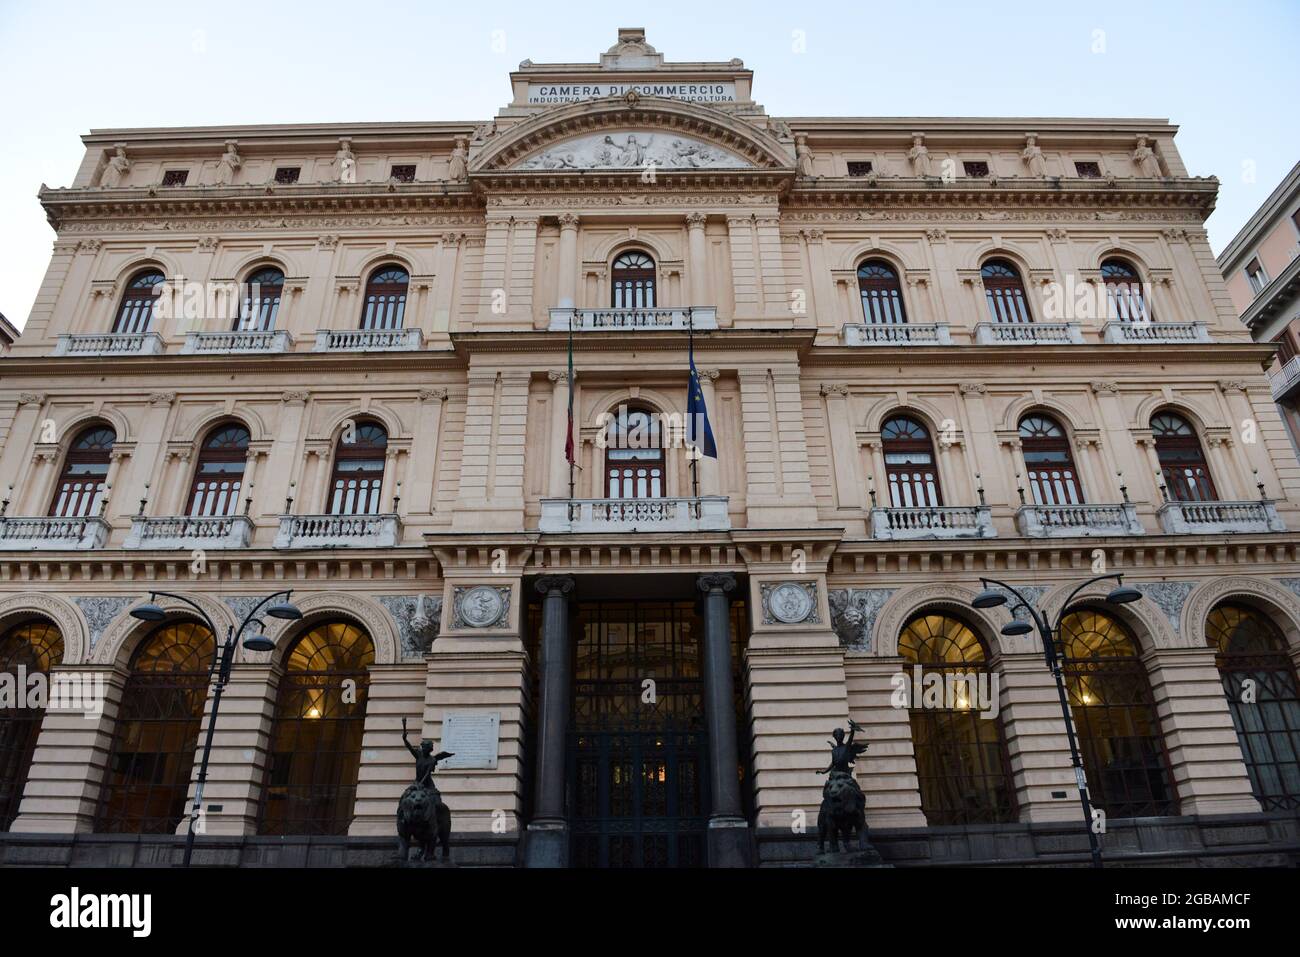 Chamber of commerce building in Naples, Italy. Stock Photo